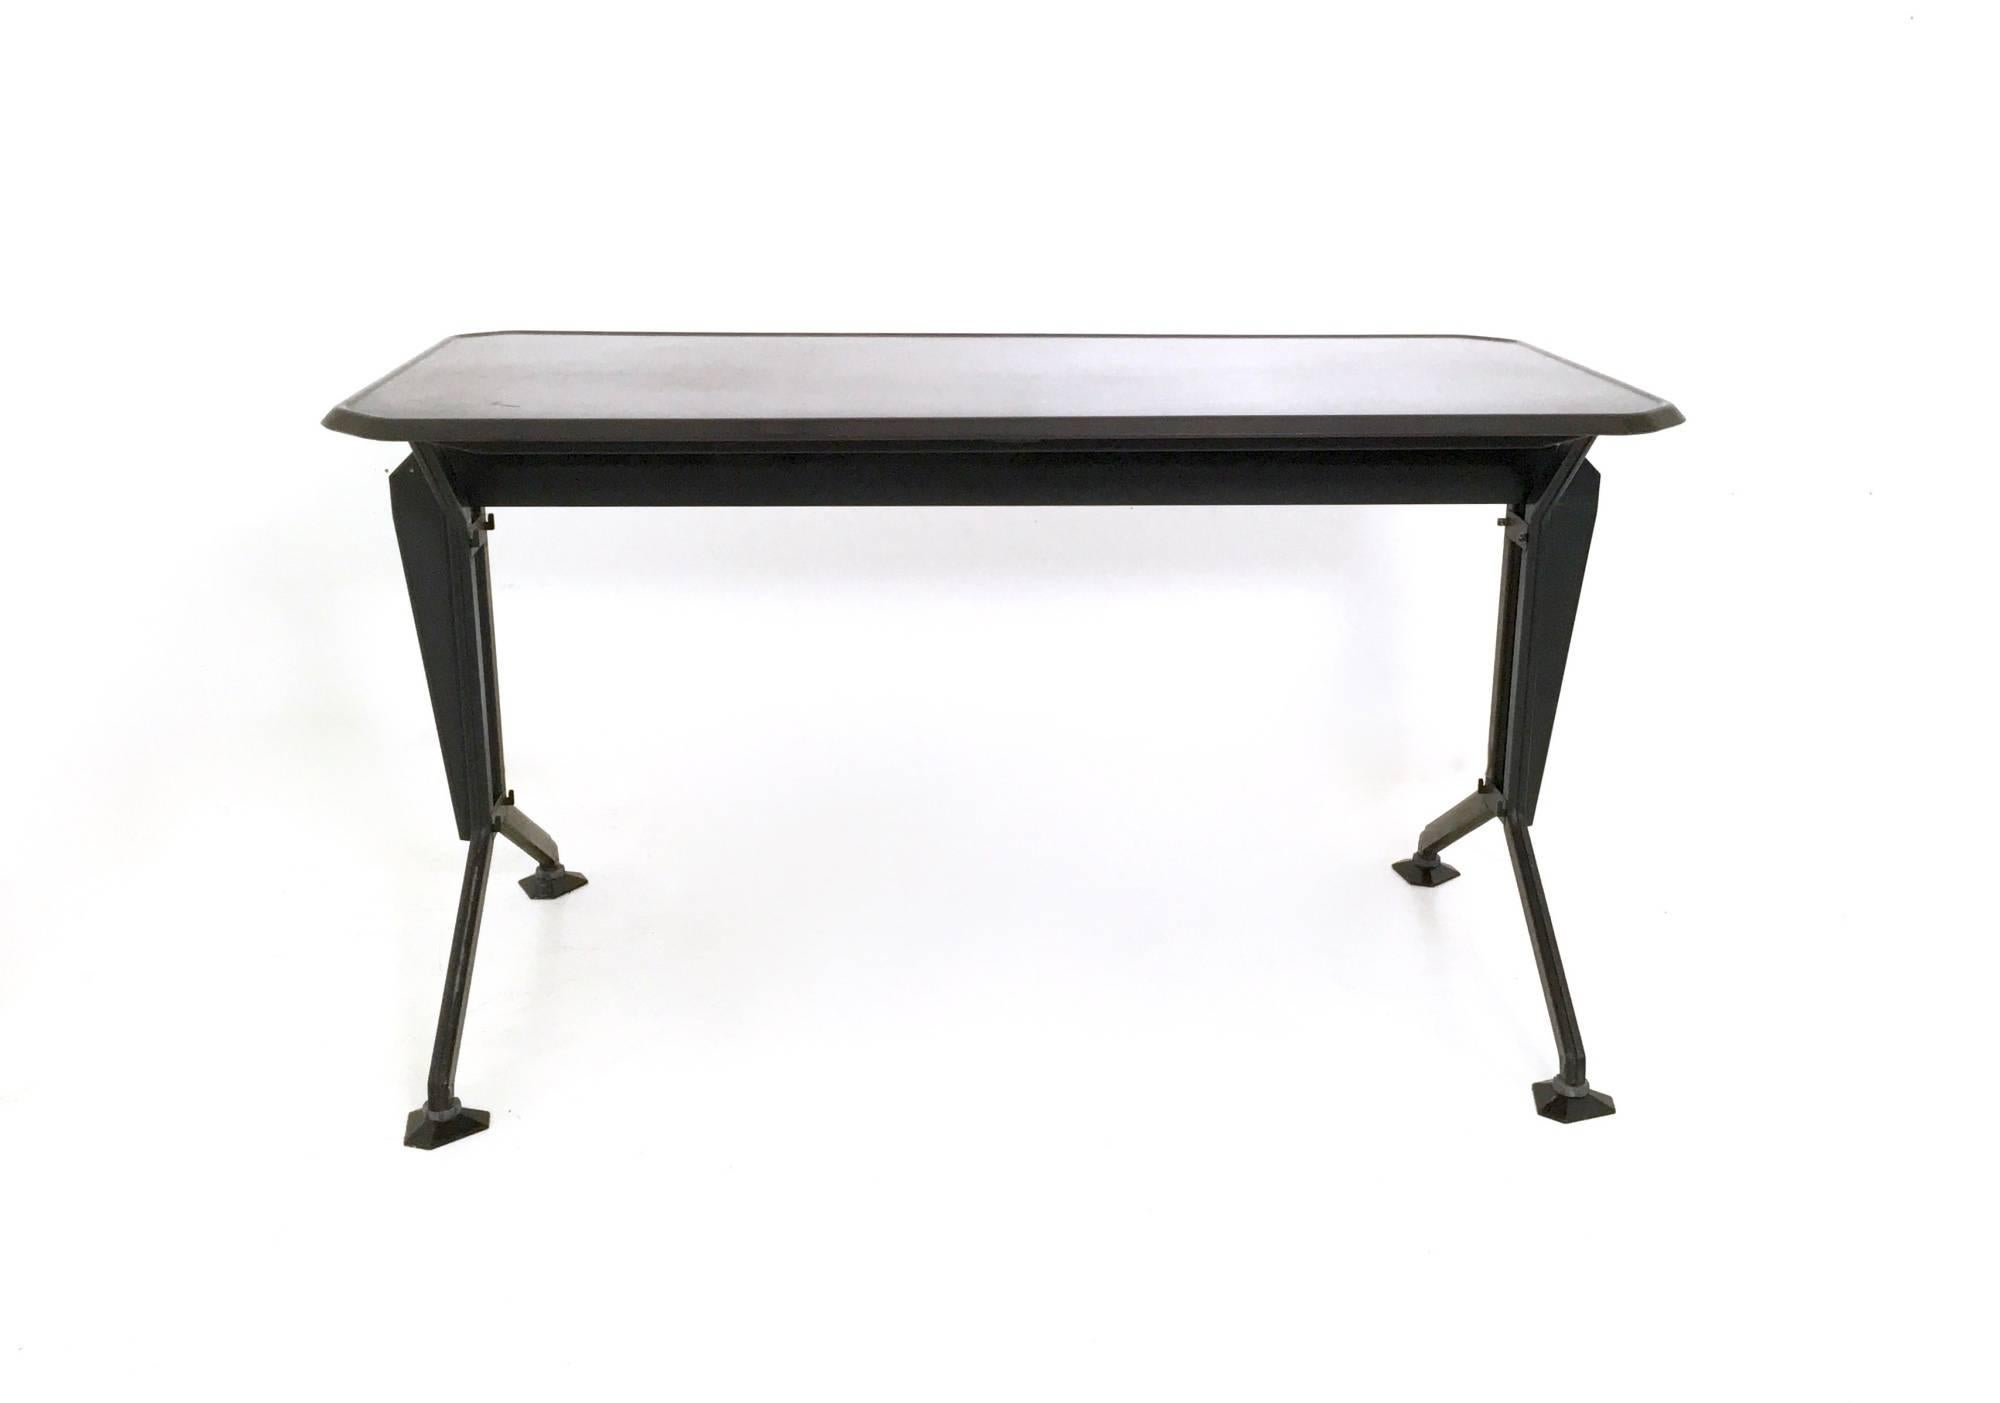 This beautiful desk was designed by Studio BBPR (Gianluigi Banfi, Lodovico Belgioioso, Enrico Peressutti and Ernesto Rogers) in 1963 for Olivetti.
The desk features a methacrylate top and a metal frame. Its feet are adjustable.
In very good original